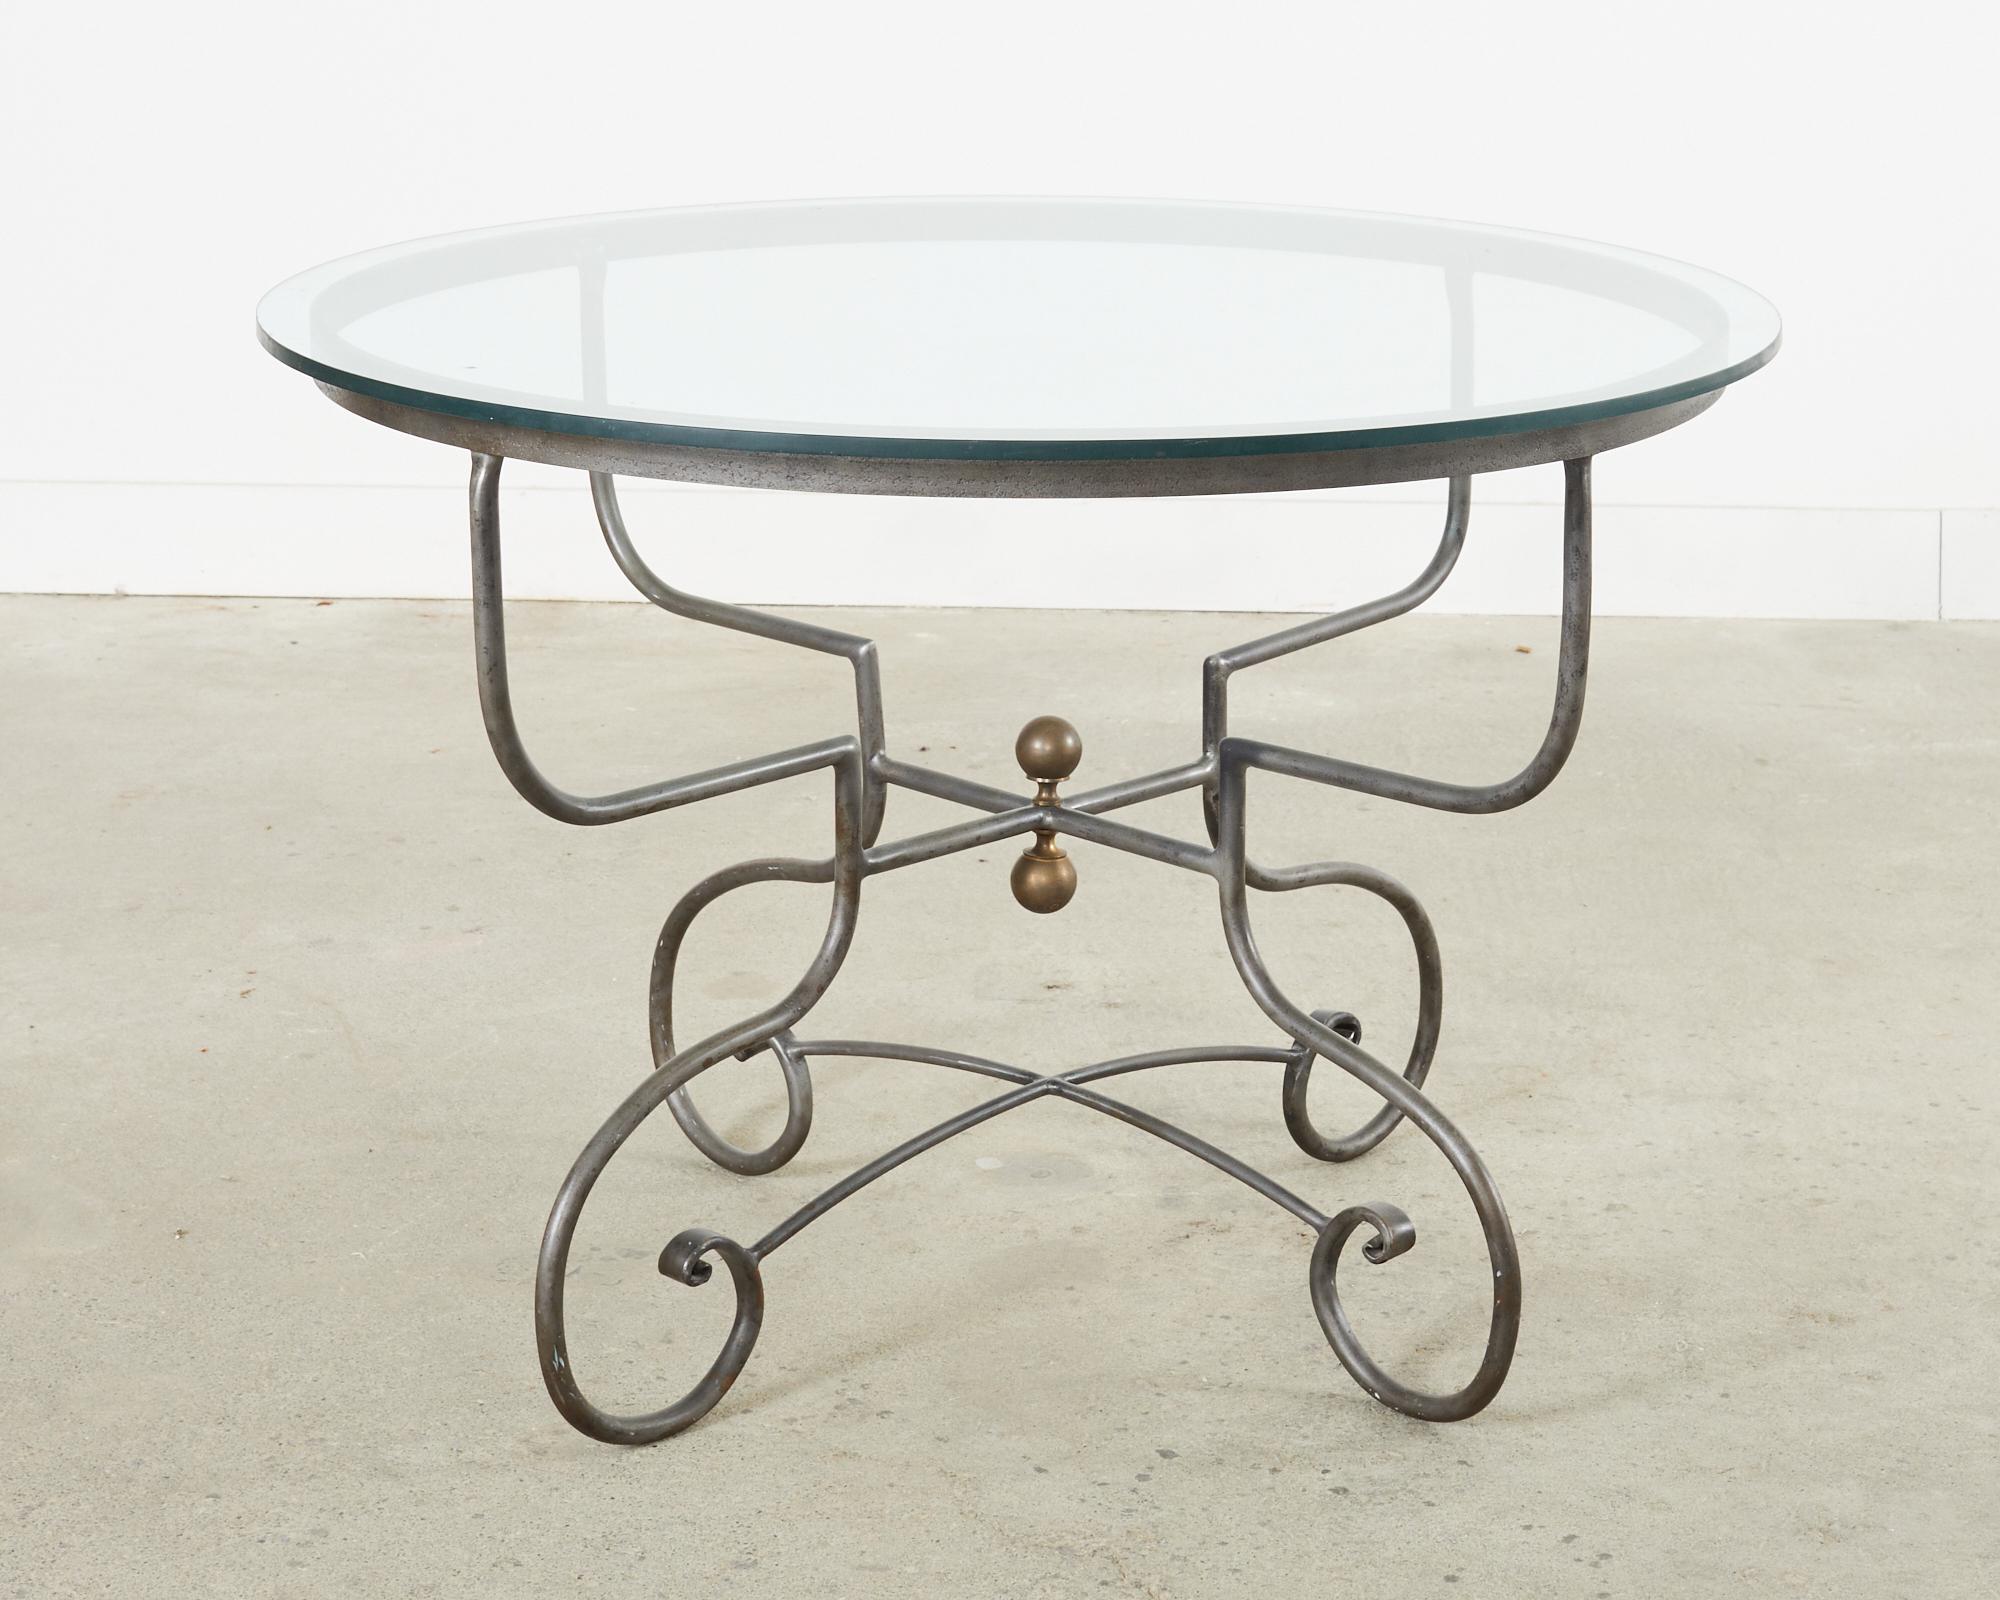 Art Nouveau French Bistro Style Round Iron Glass Garden Dining Table